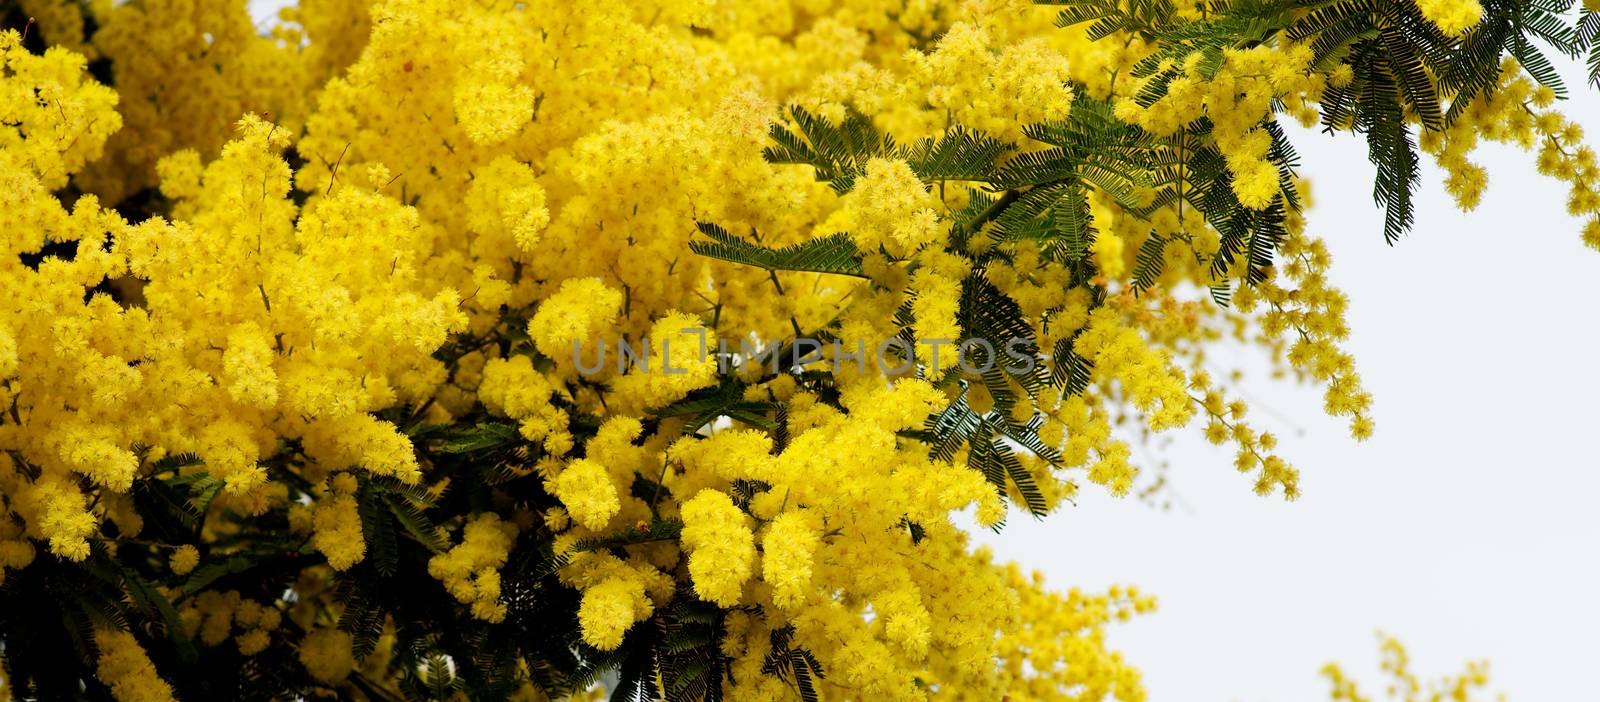 Beauty Yellow Lush Foliage Flowering Mimosa with Leafs closeup on Cloudy Sky background